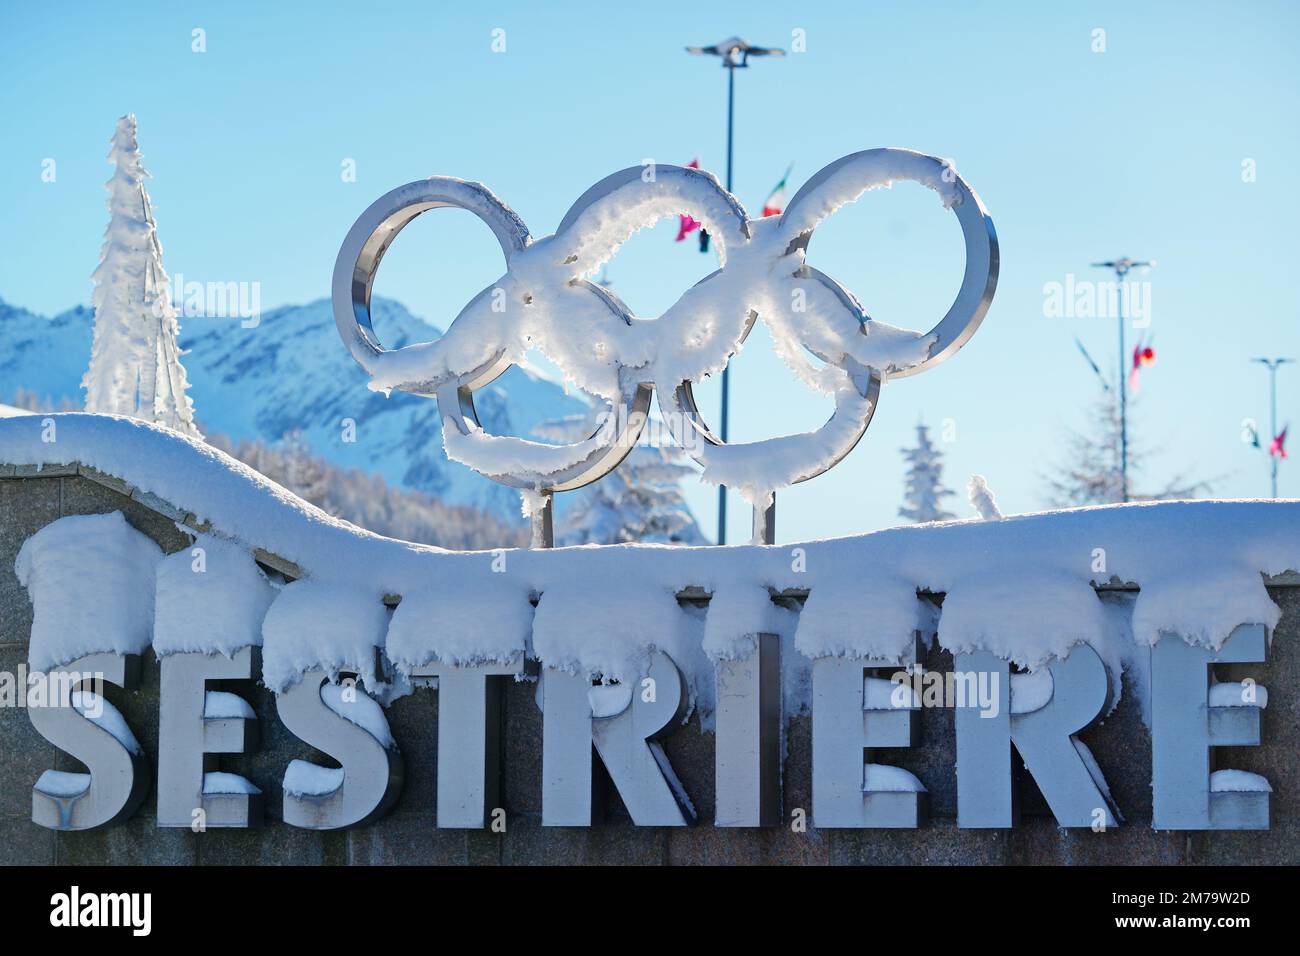 Sign of the alpine village of Sestriere, which was the site of the Winter Olympics in 2006. Sestriere, Italy - December 2022 Stock Photo